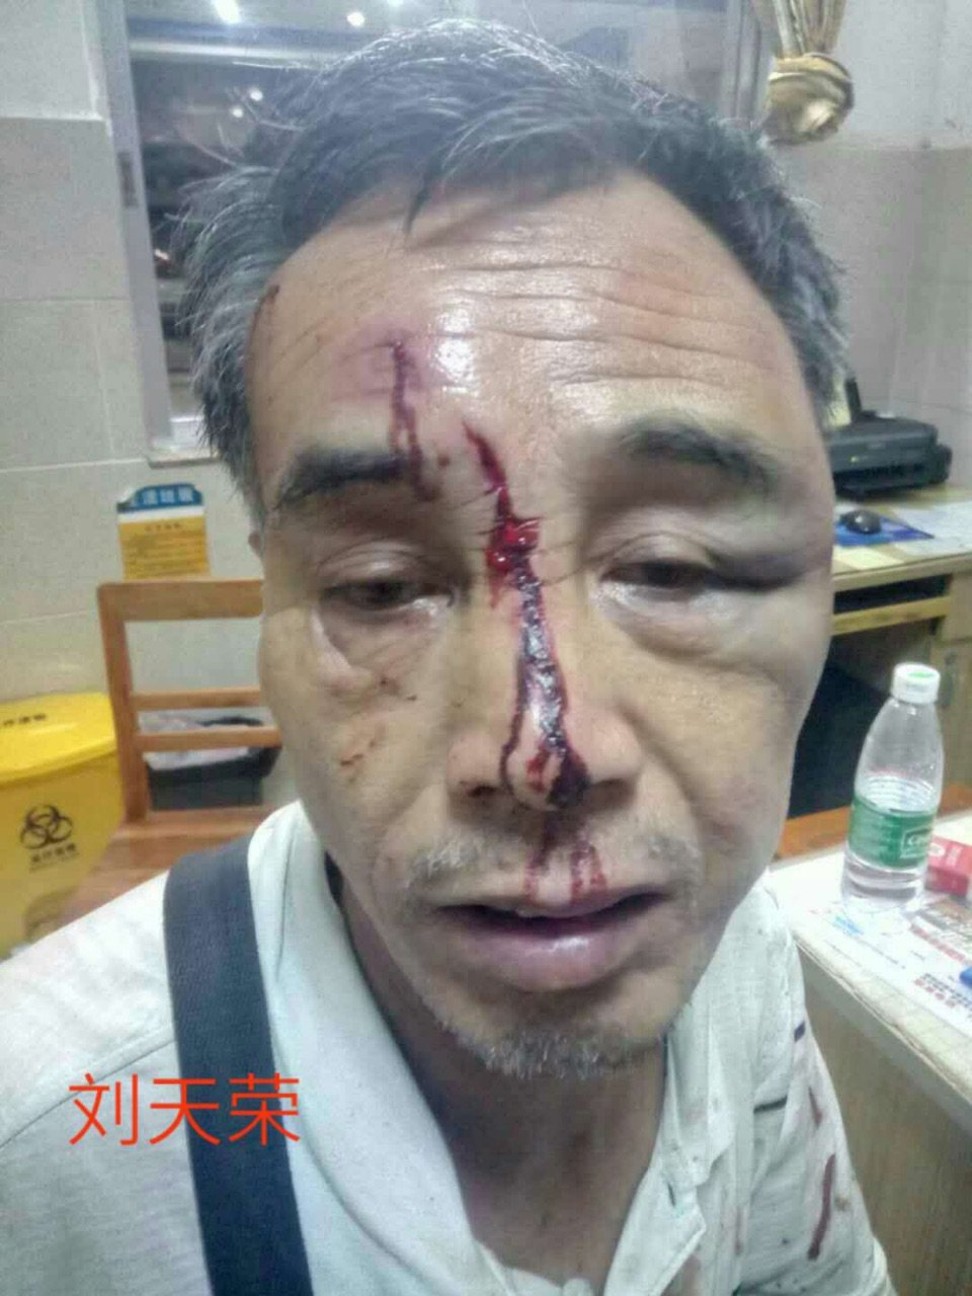 Retired military man Liu Tianrong, 60, needed hospital treatment after being beaten up while trying to petition Beijing for better treatment for veterans. Photo: Liu Tianrong